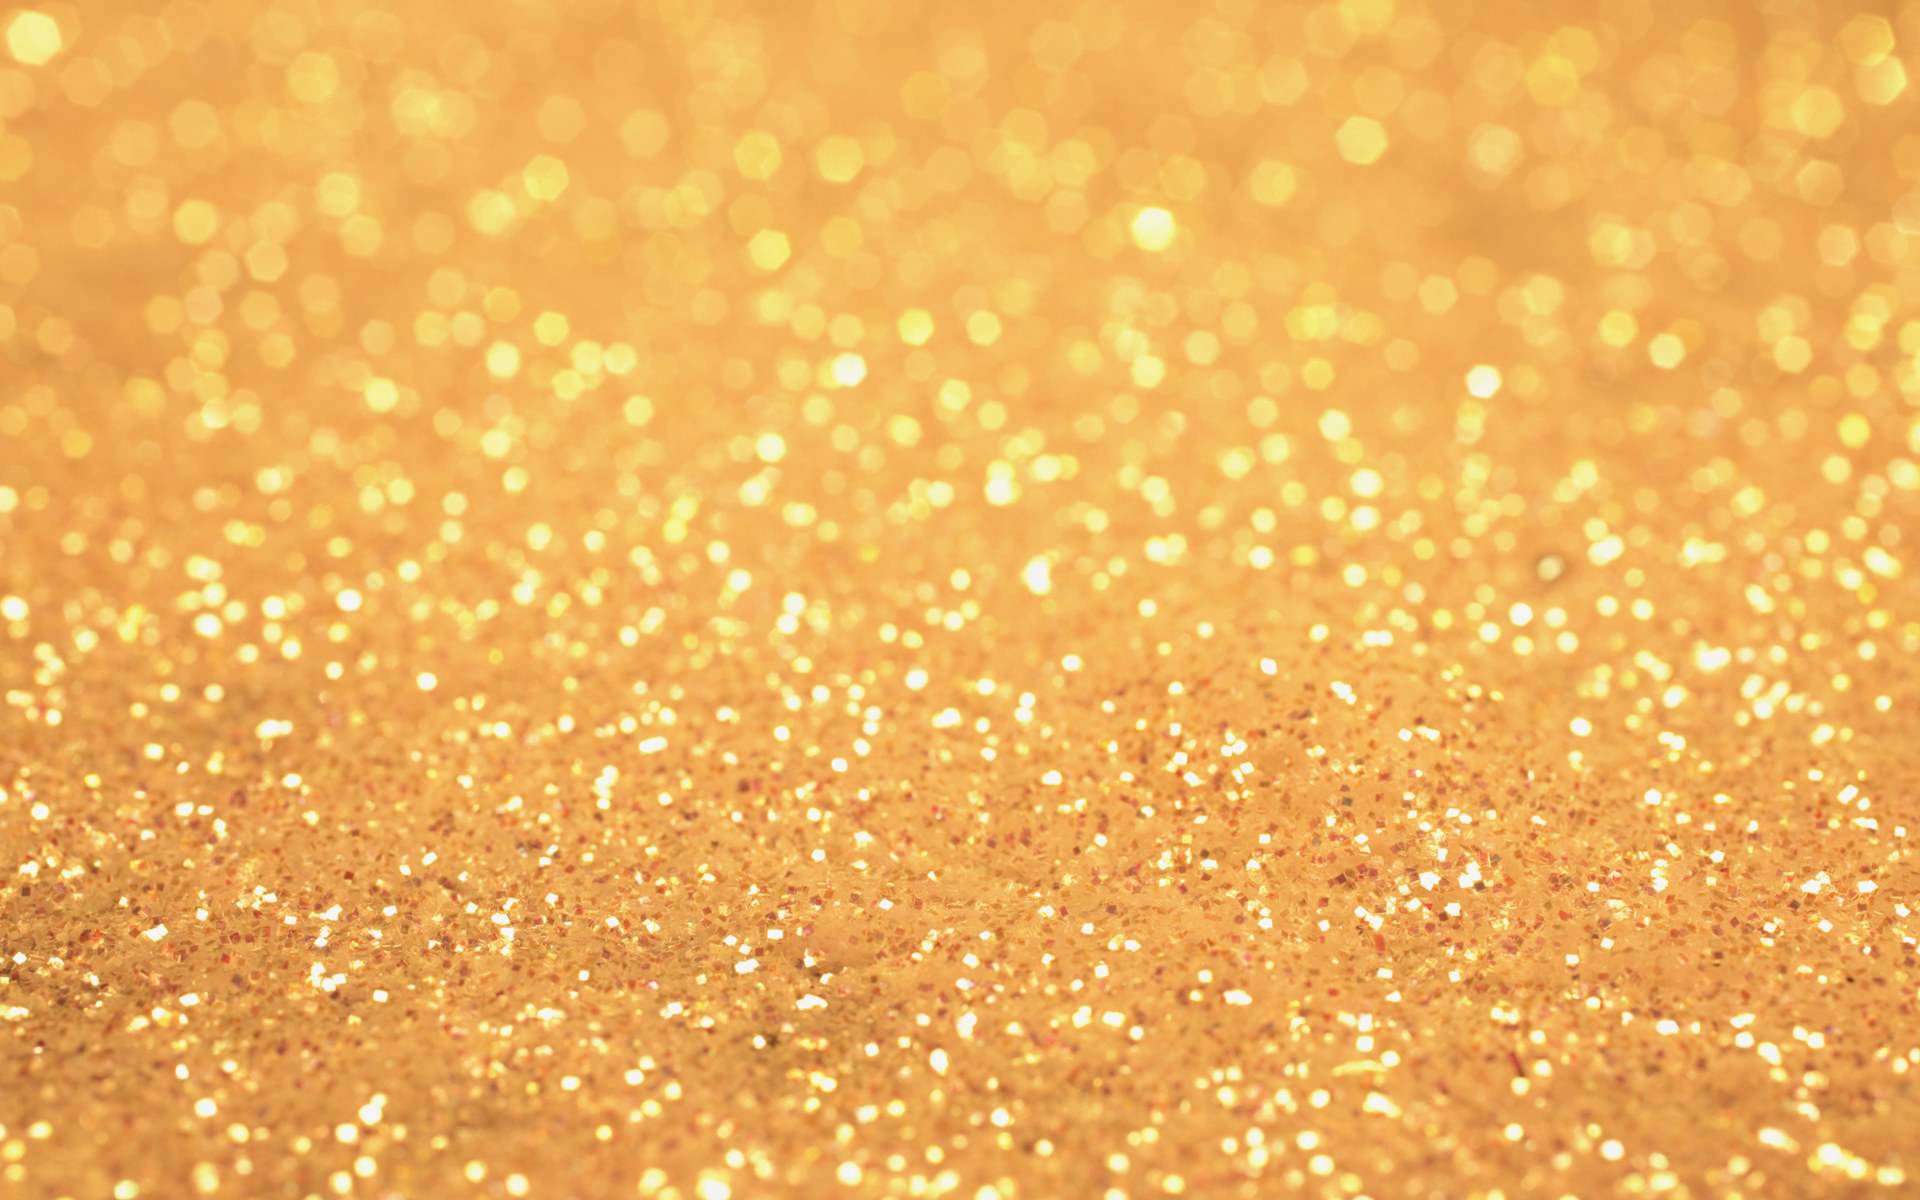 Sparkle Background Wallpaper Pictures Image